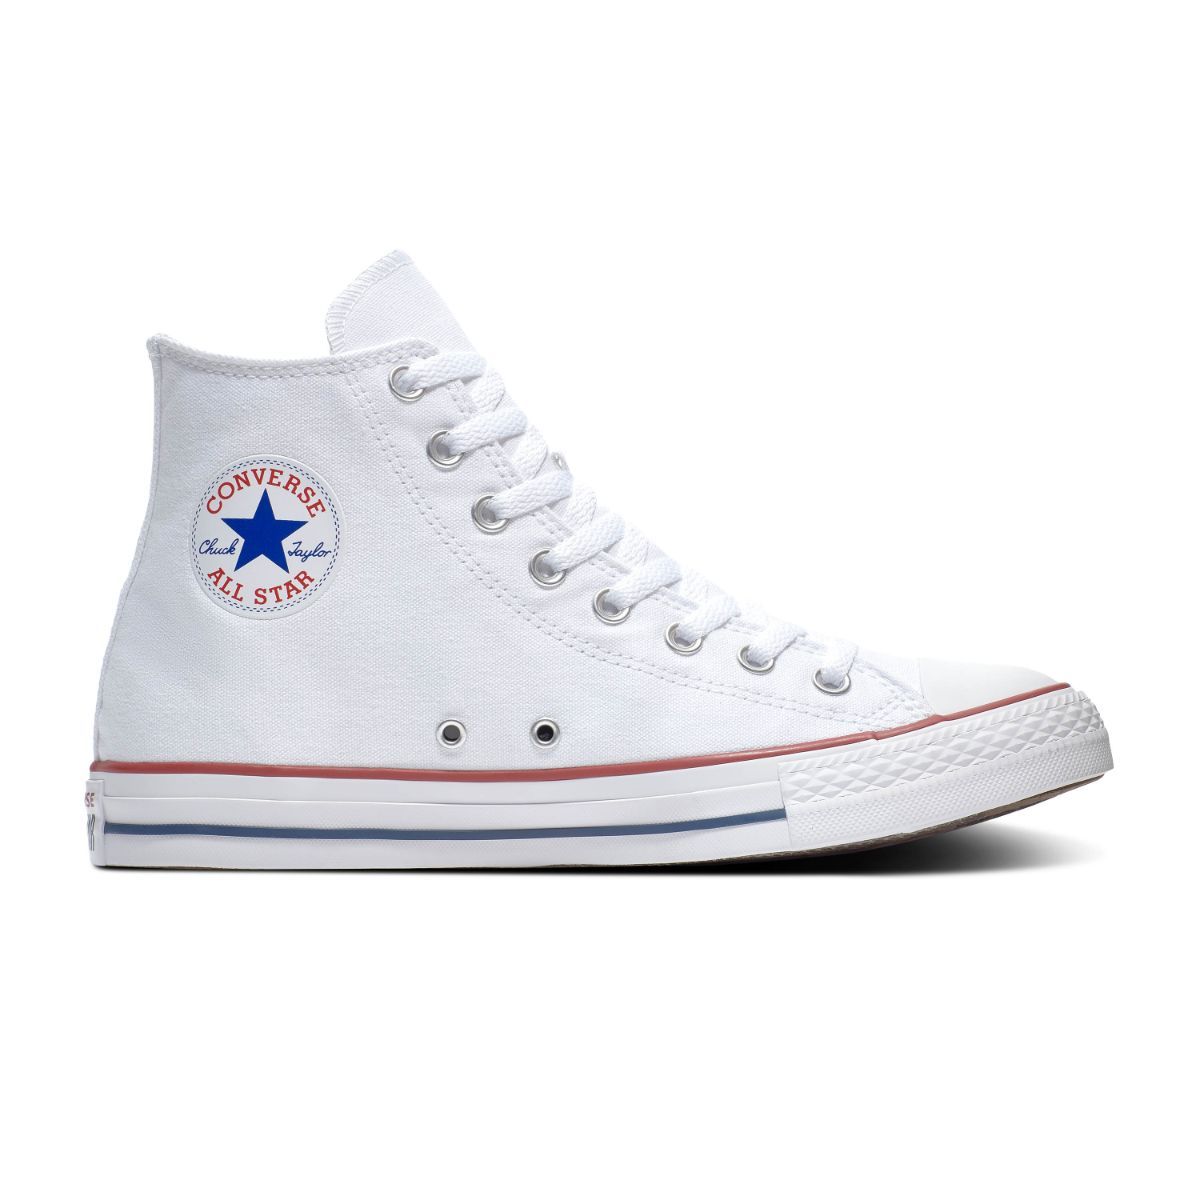 Reden Medaille backup Chuck Taylor All Star White High Top - Millennium Shoes